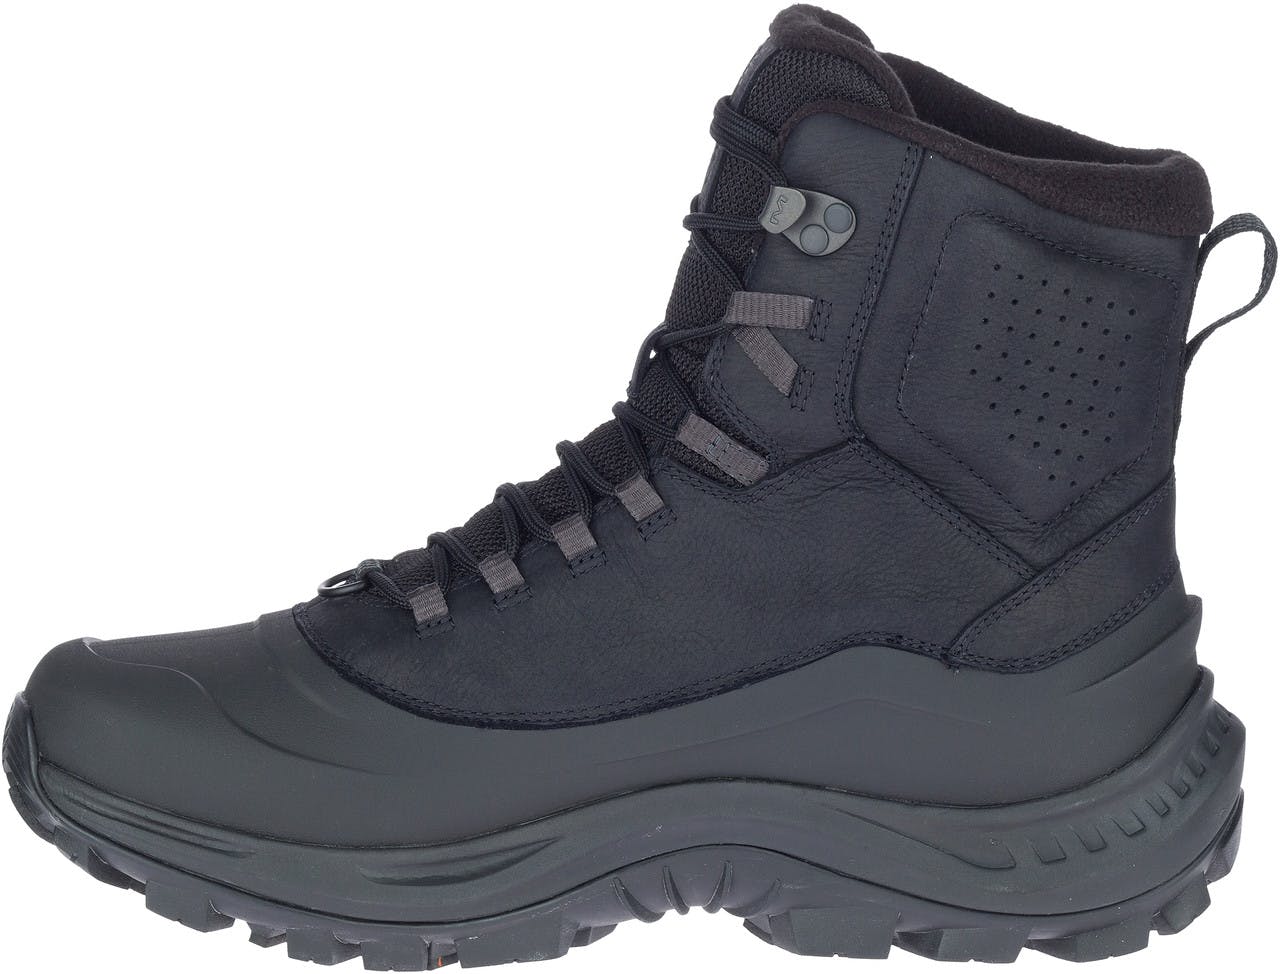 Bottes imper Thermo Overlook 2 Mid Arctic Grip Noir